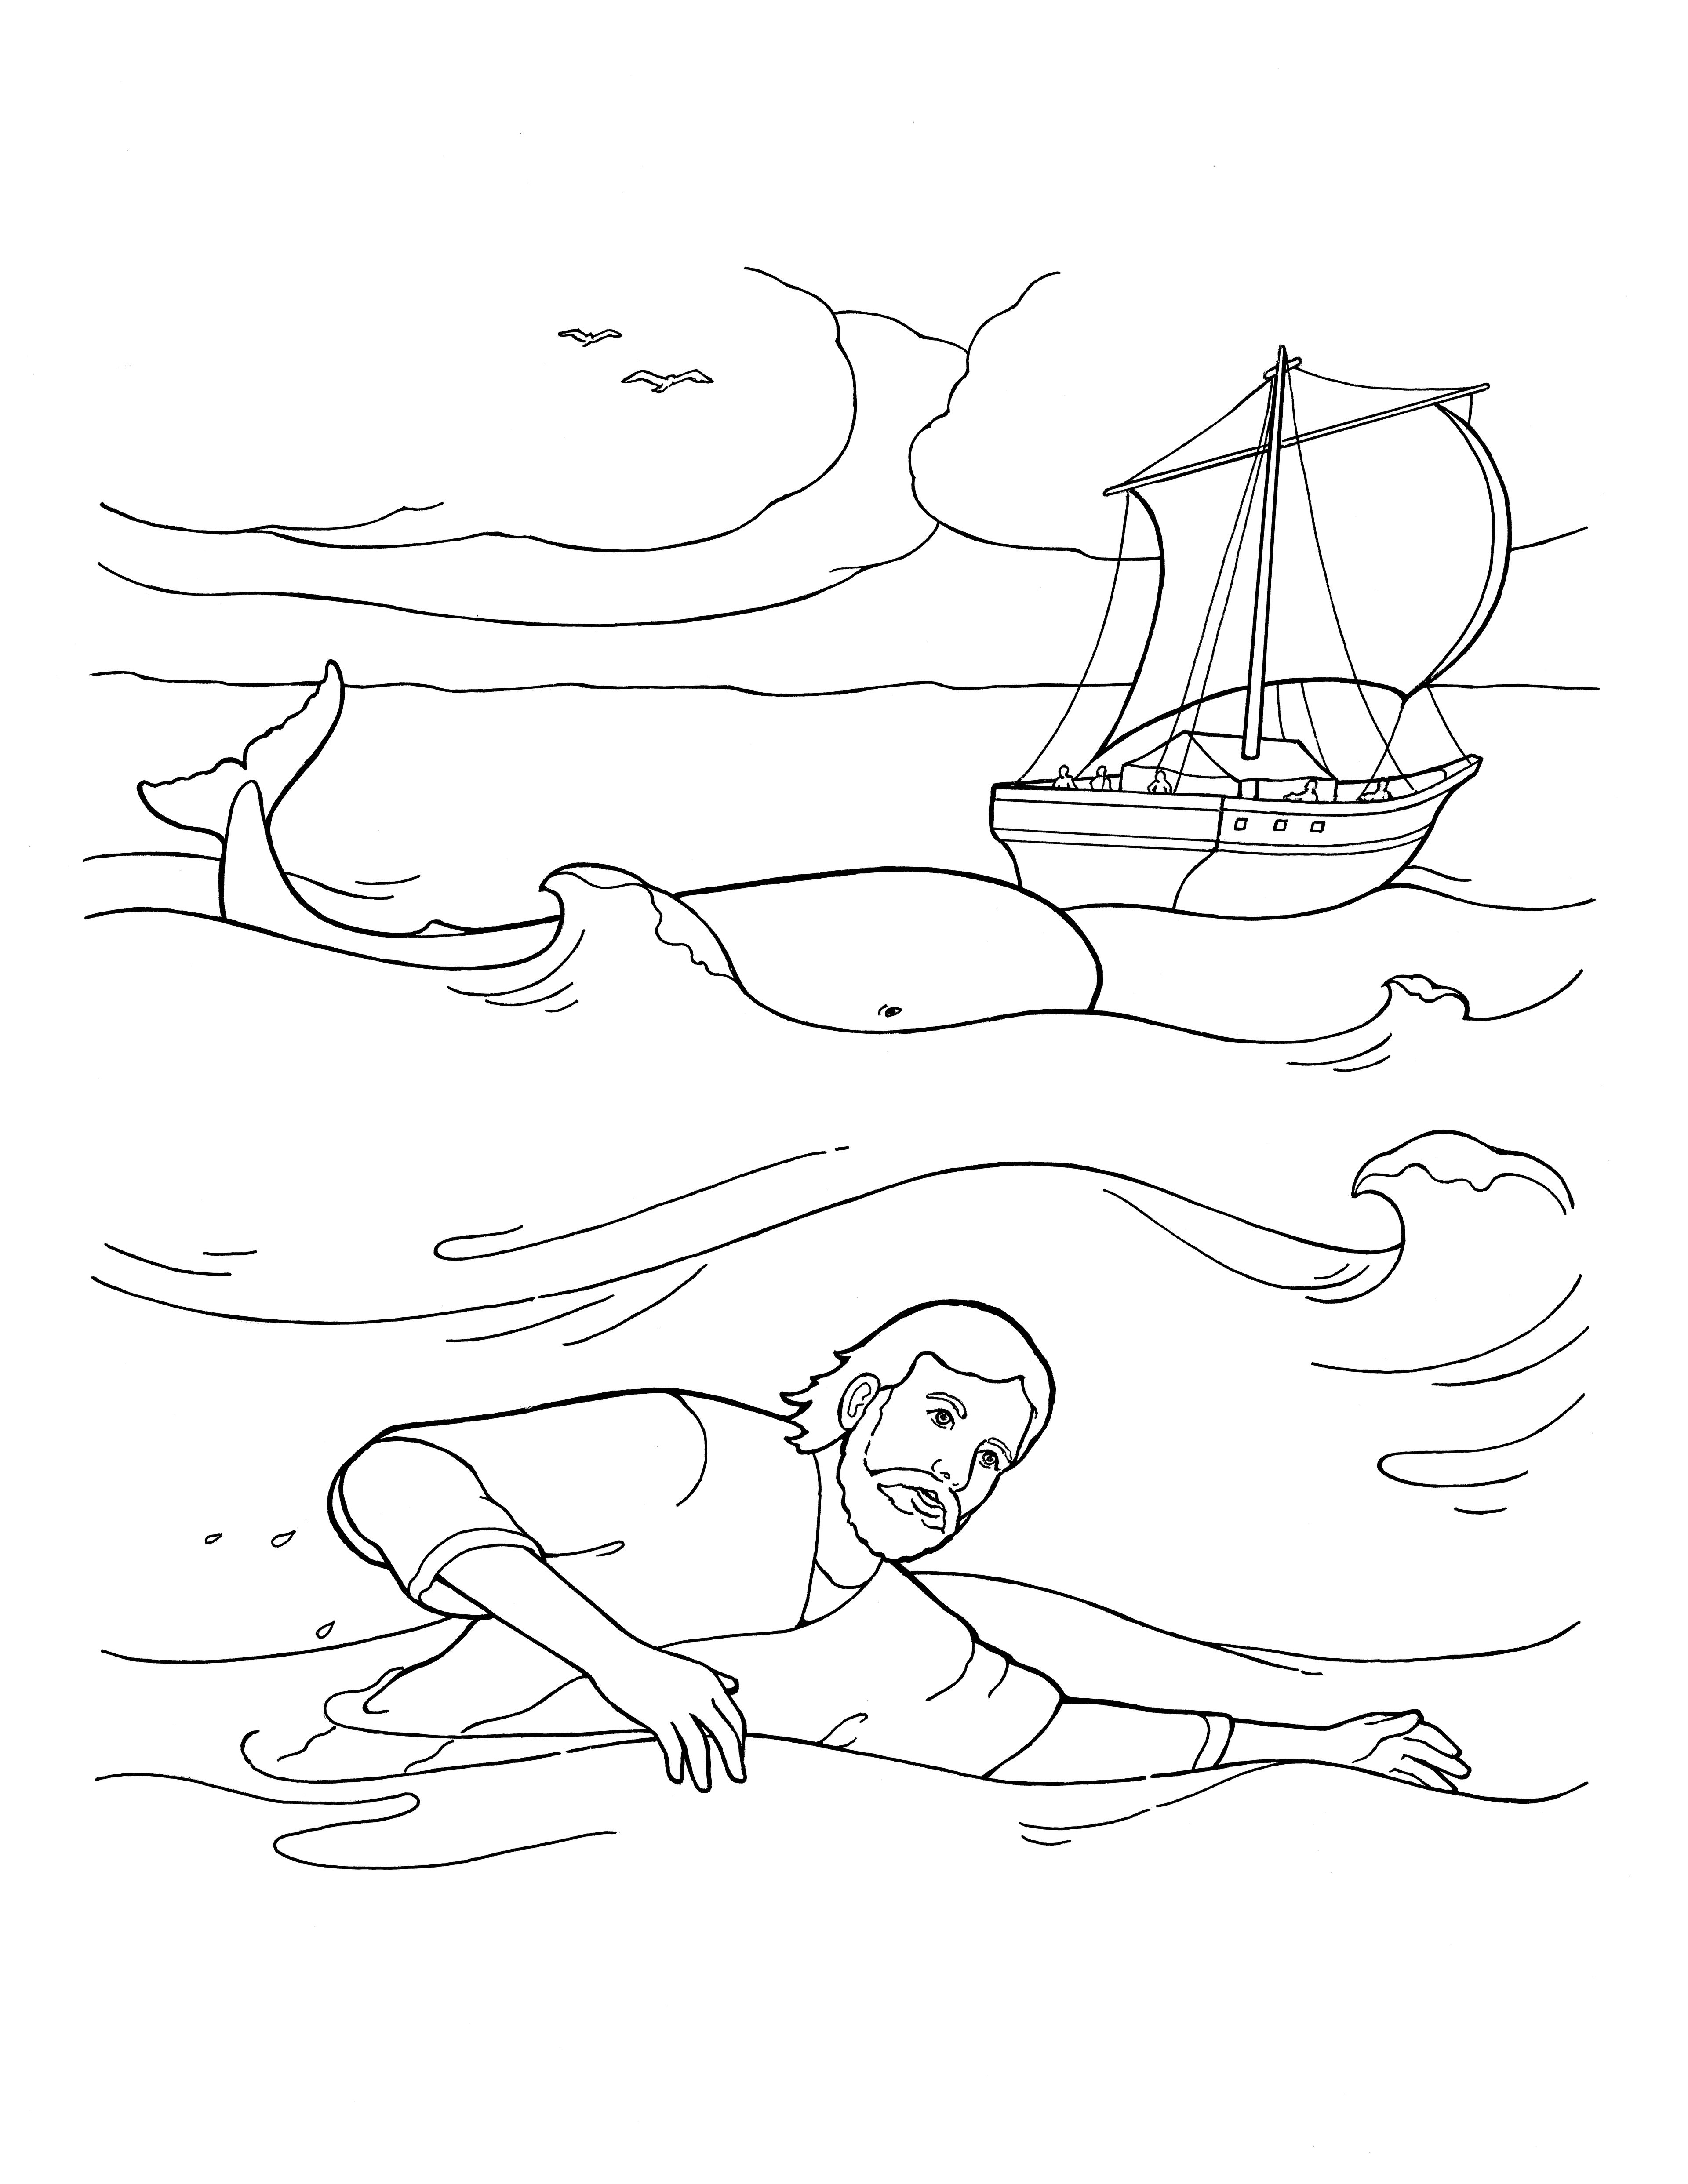 An illustration of Jonah and the whale.